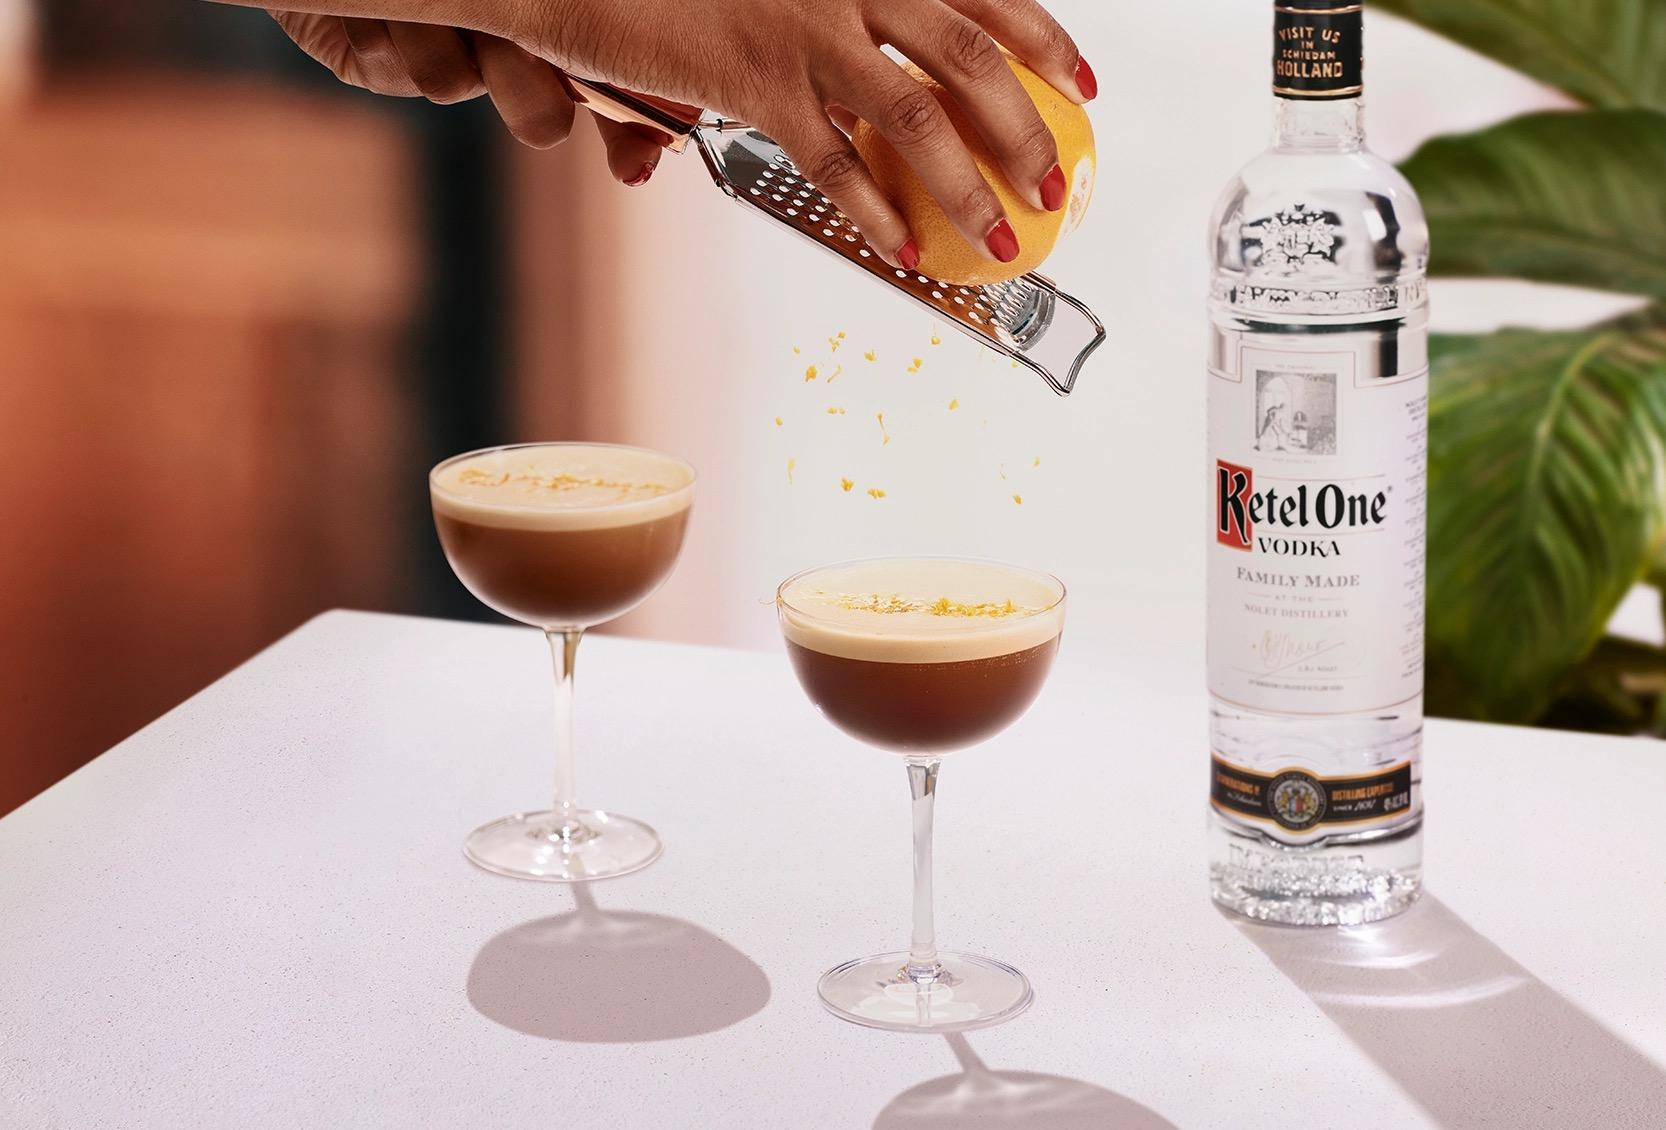 Ketel One Espresso Martini in Coupe Glass with hand grating orange 